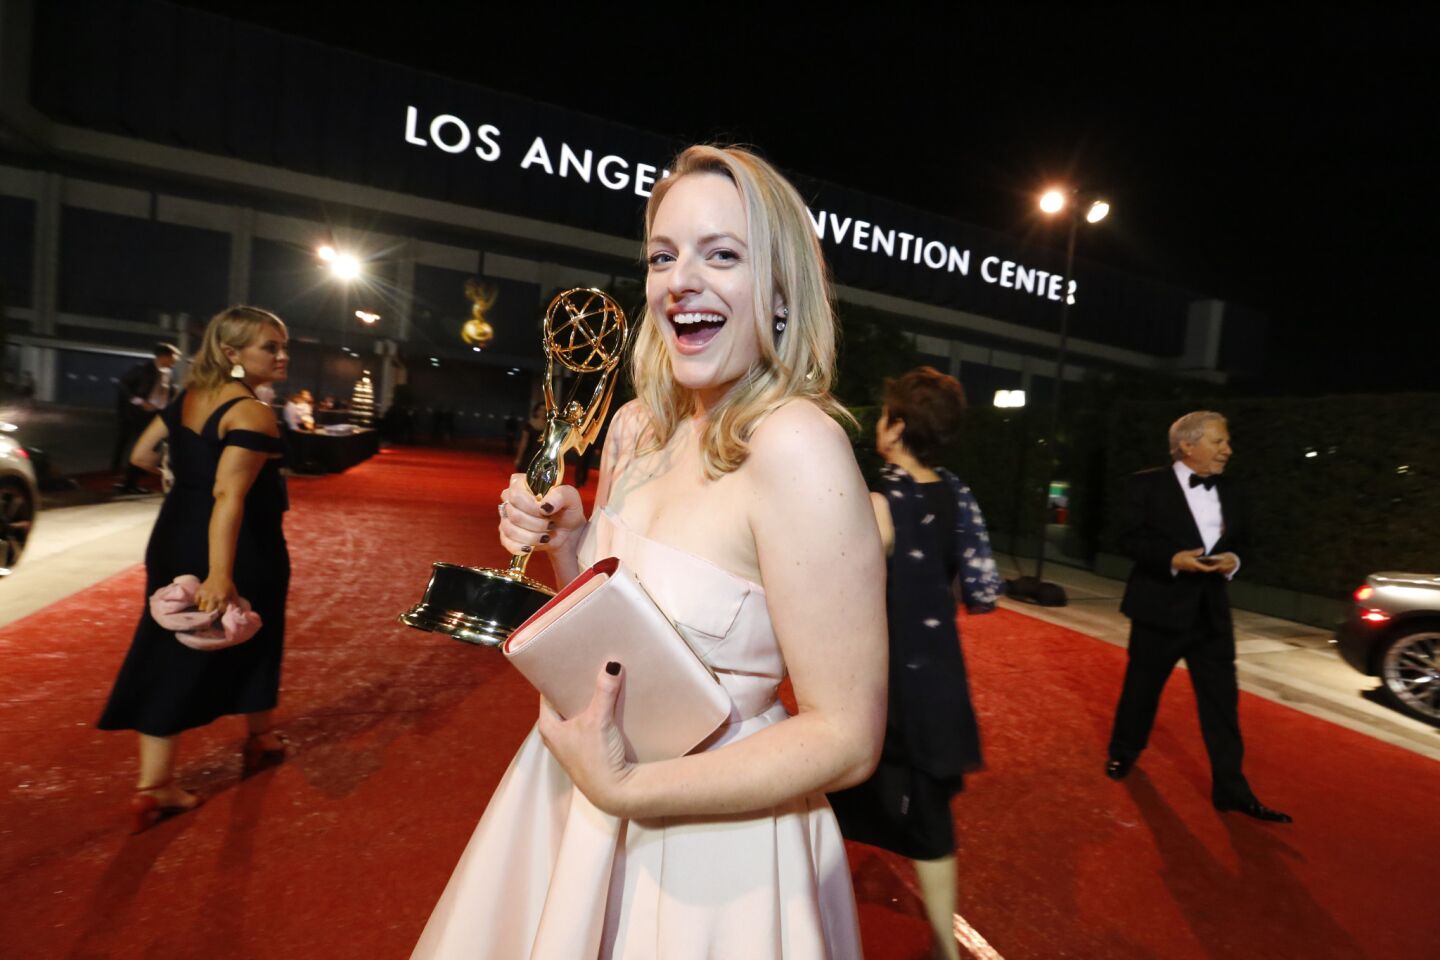 Elisabeth Moss, who won the lead actress in a drama series Emmy for her work on "The Handmaid's Tale," poses with her statue in front of the convention center.